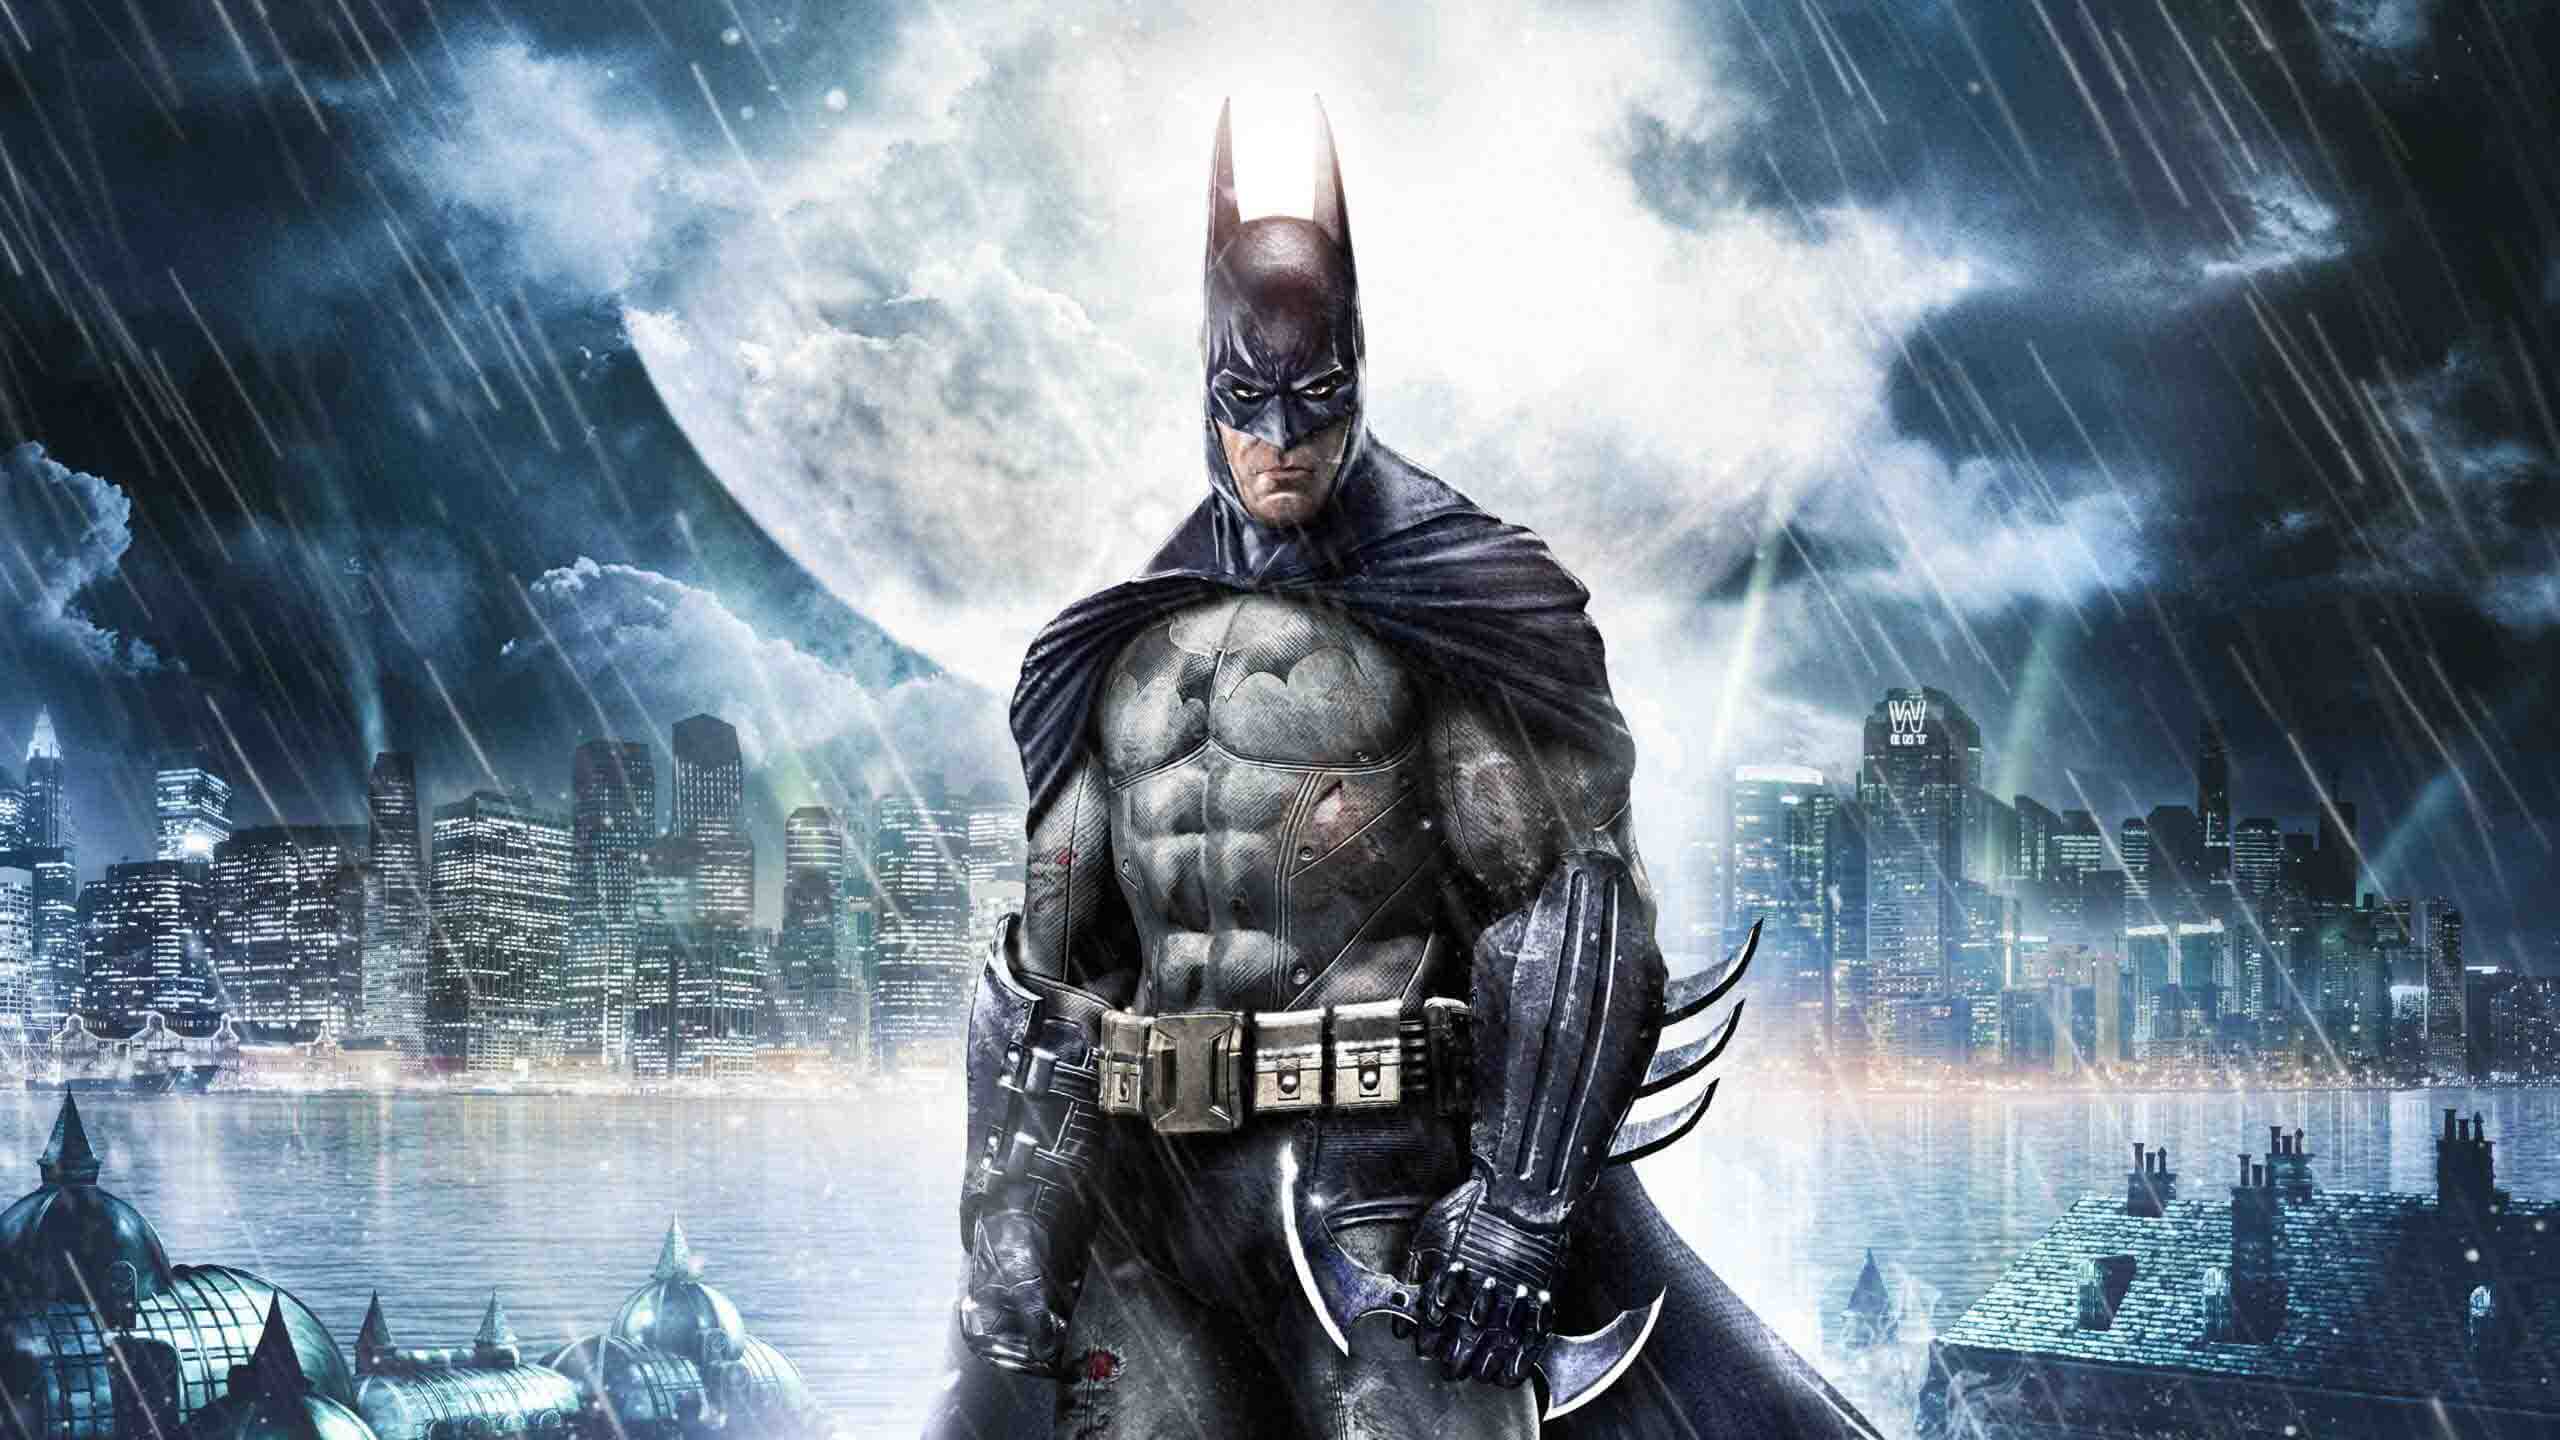 Batman™: Arkham Asylum Game of the Year Edition System Requirements for PC Games minimum, recommended specifications for Windows, CPU, OS, RAM, Storage, GPU.